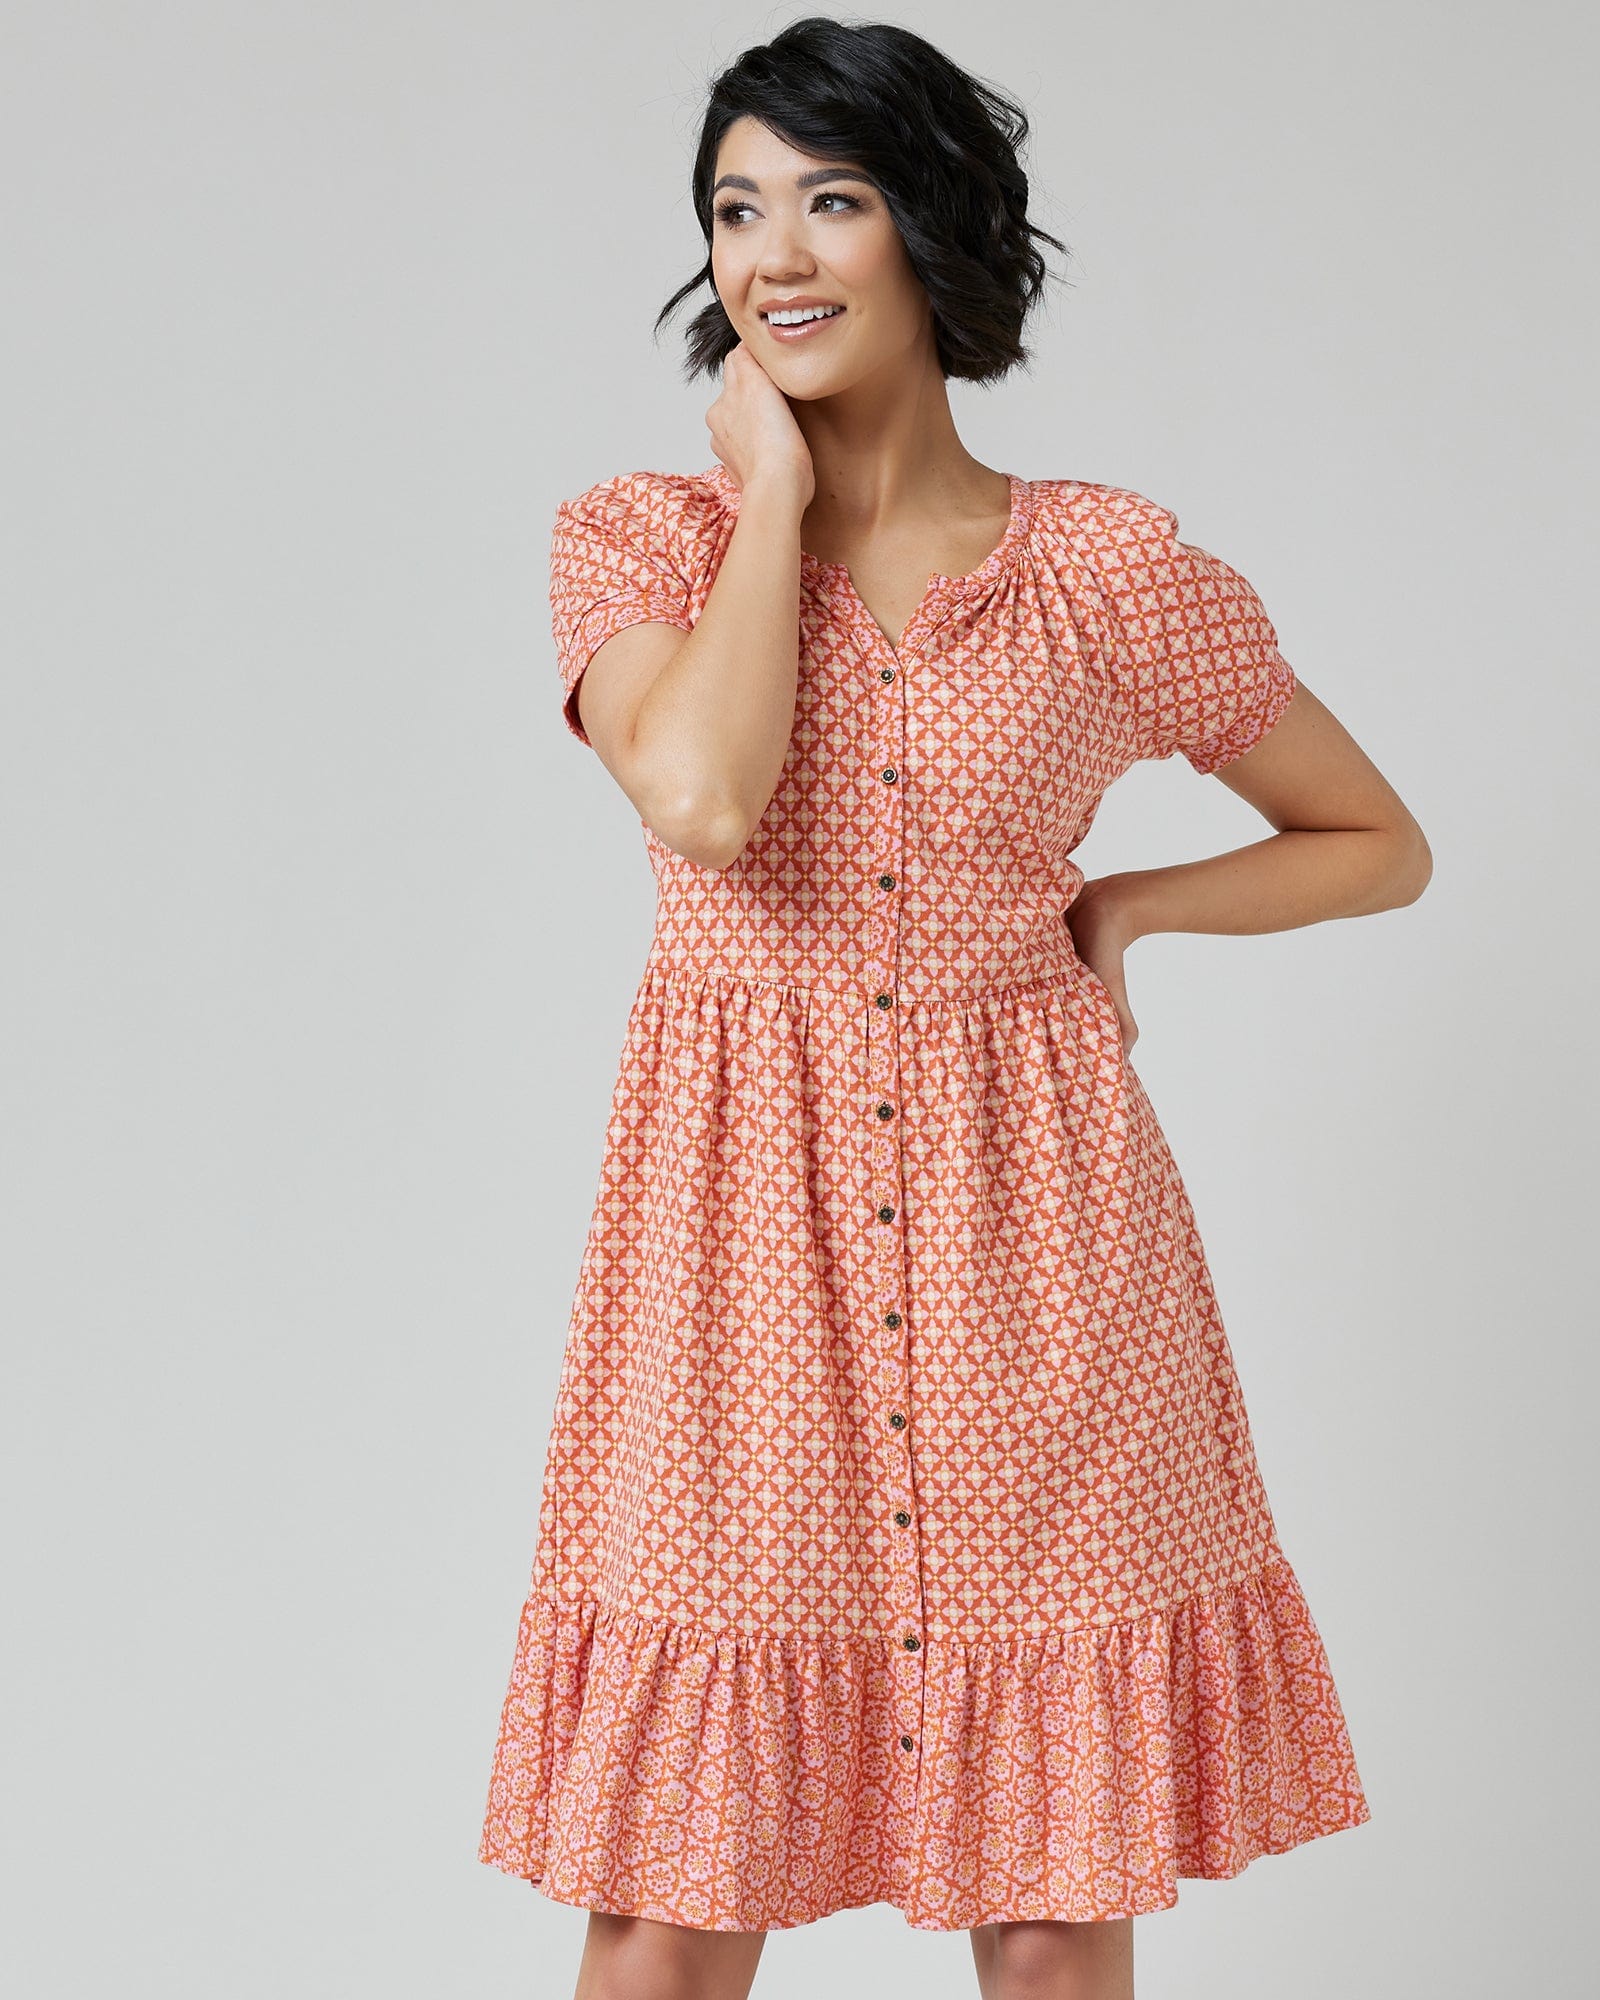 Woman in a short sleeve, knee-length, orange with white polka dot dress